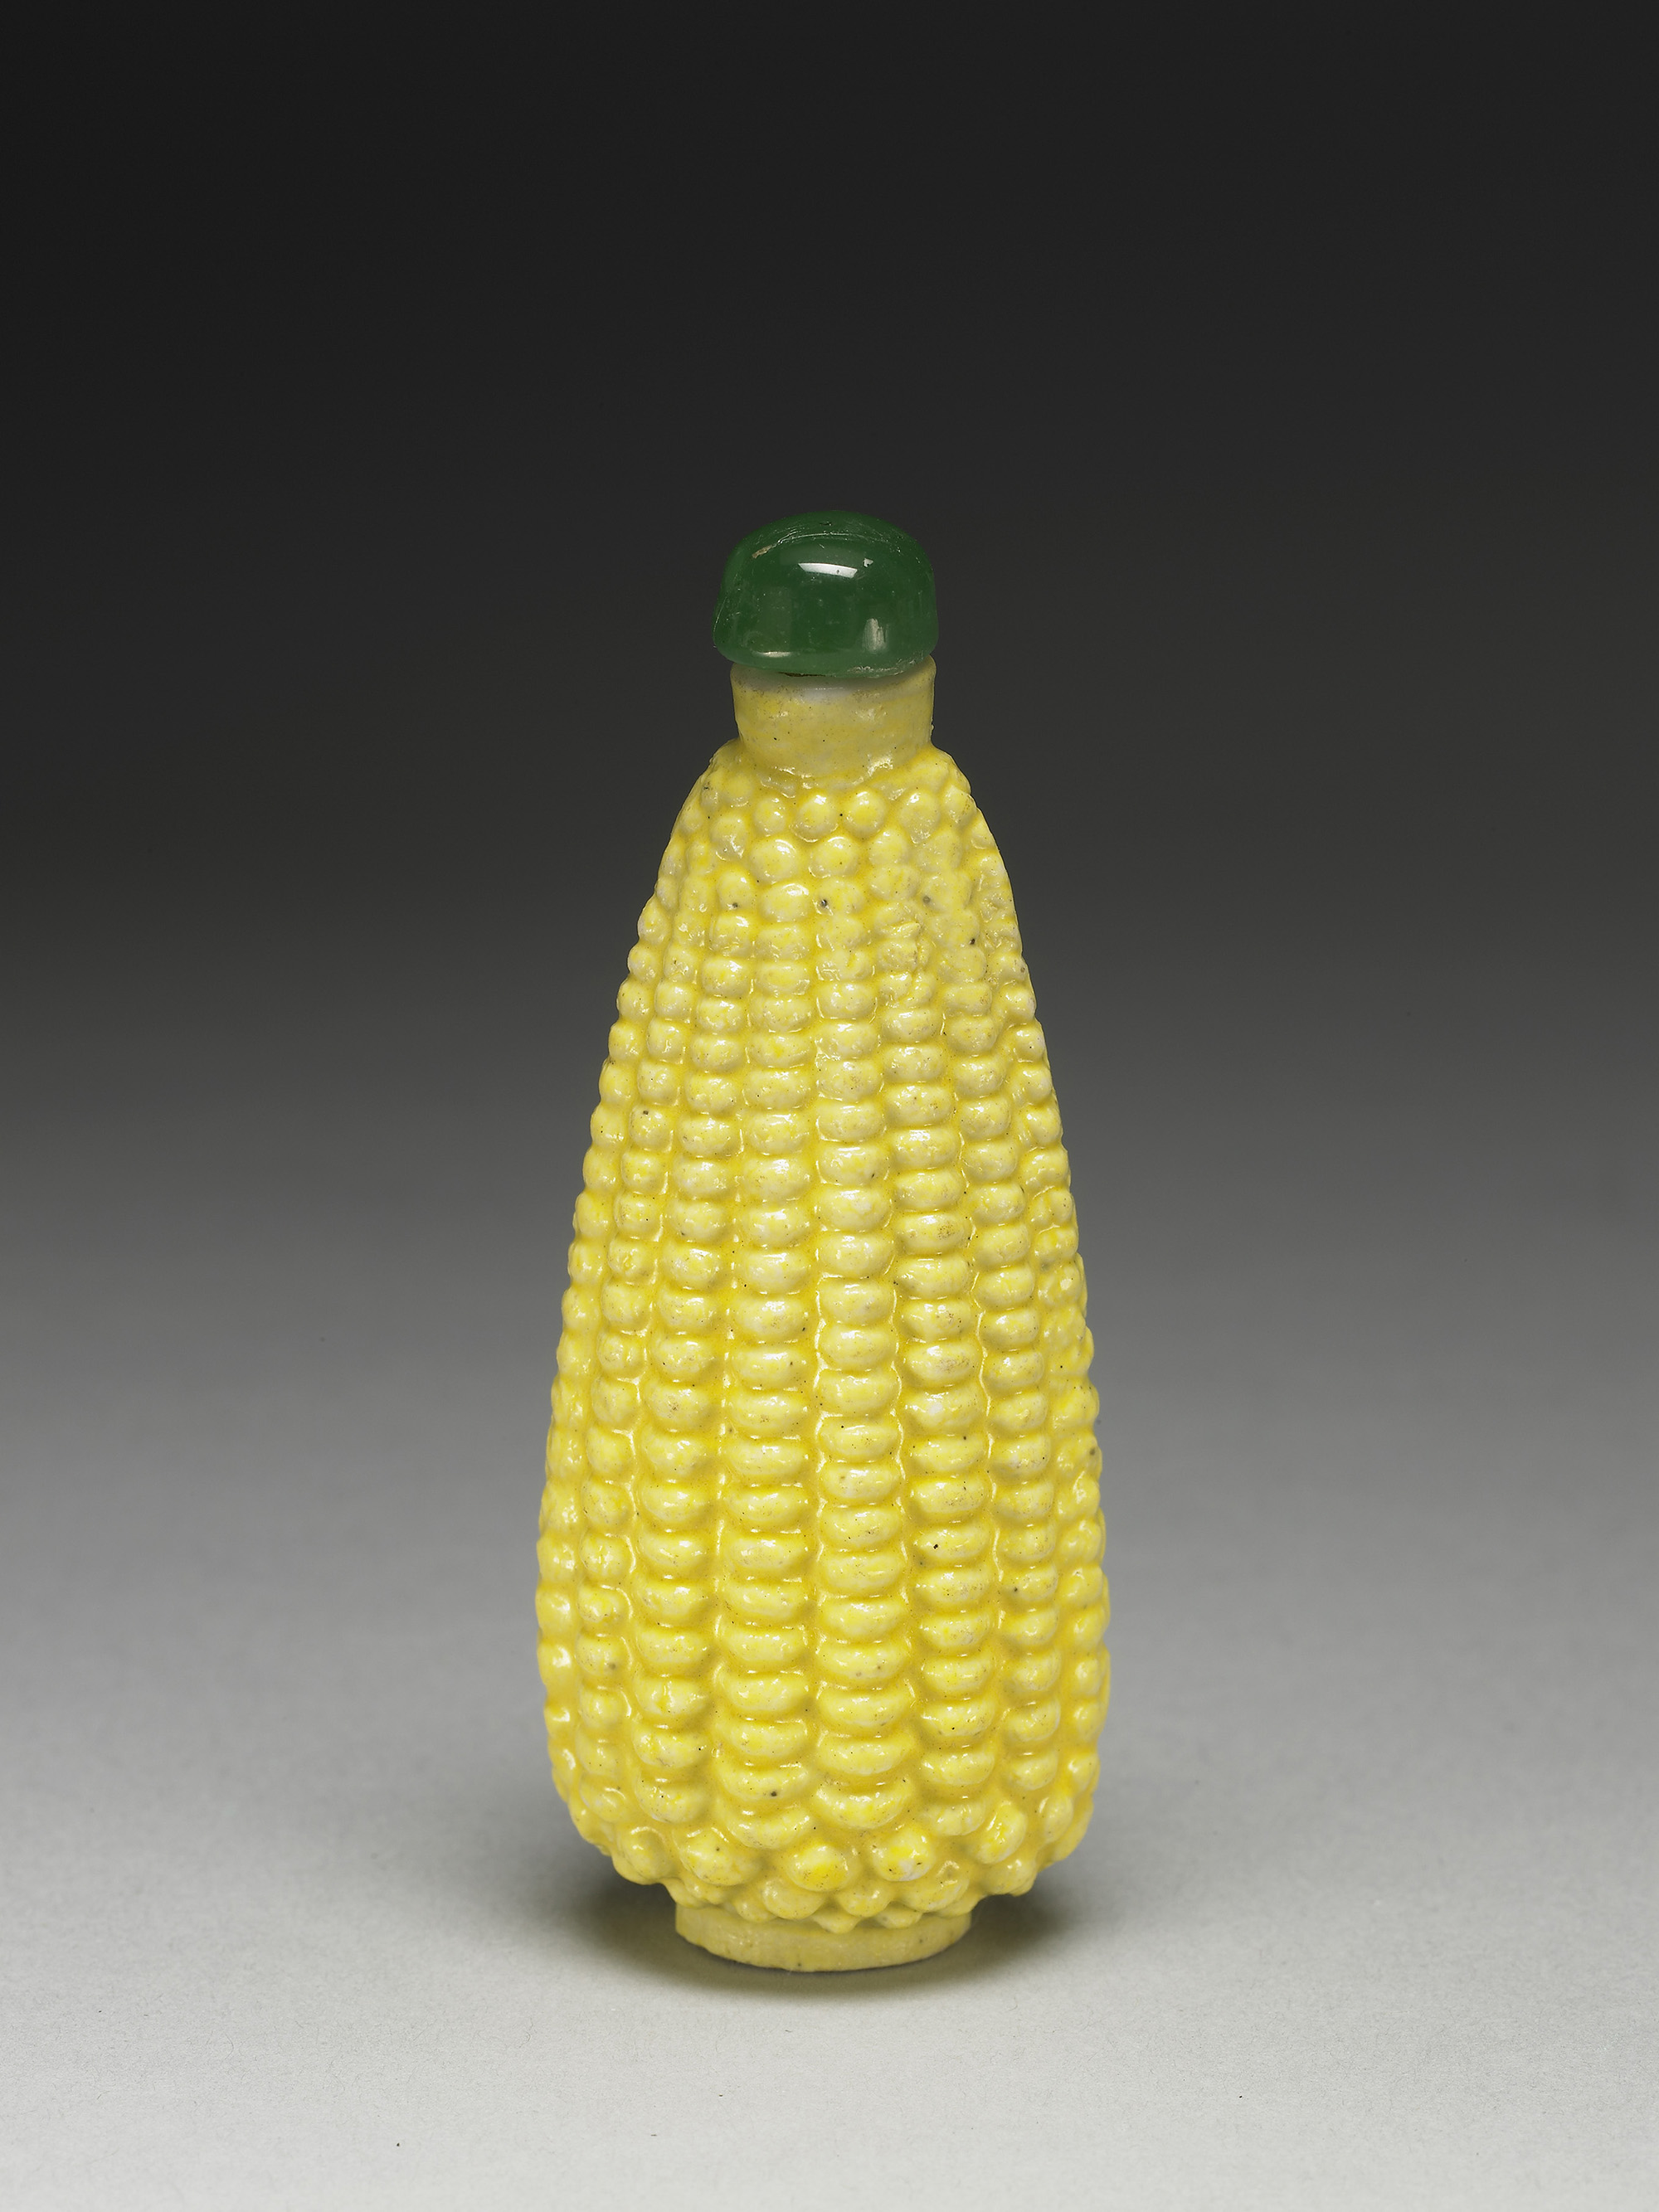 Porcelain snuff bottle in the shape of a corn cob in yellow glaze